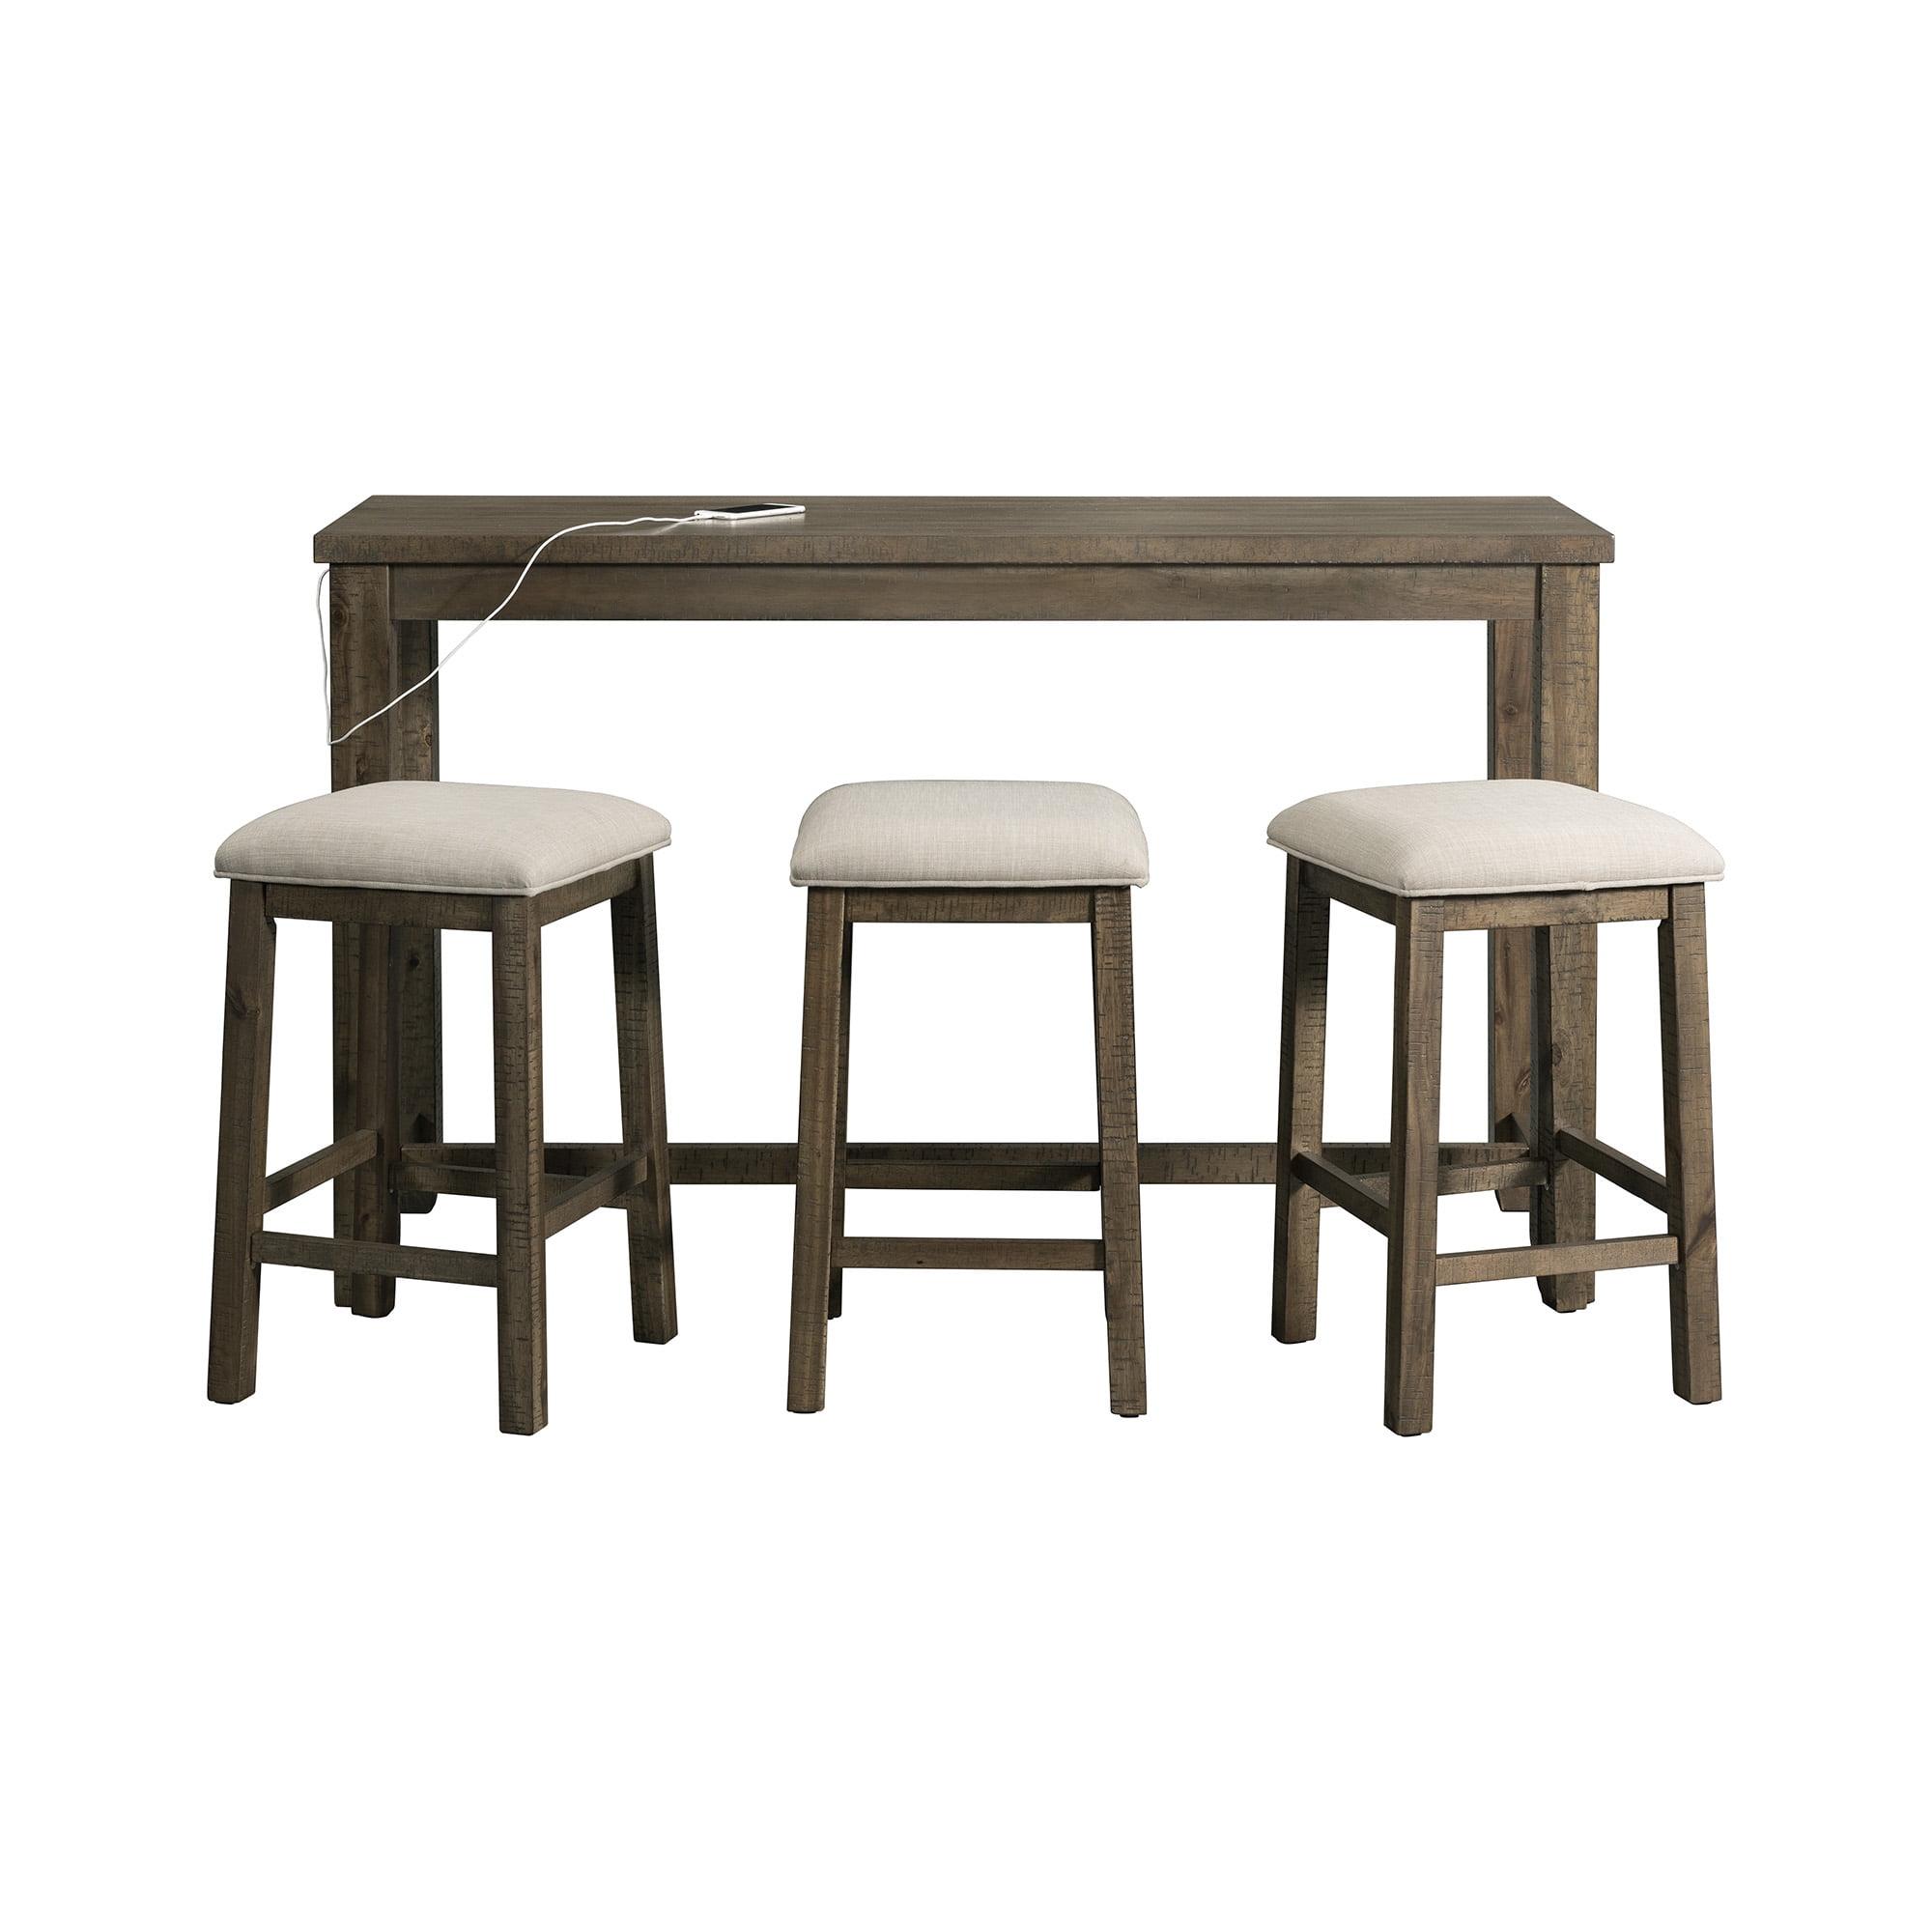 Gray Transitional Rectangular Pub Table Set with 4 Chairs